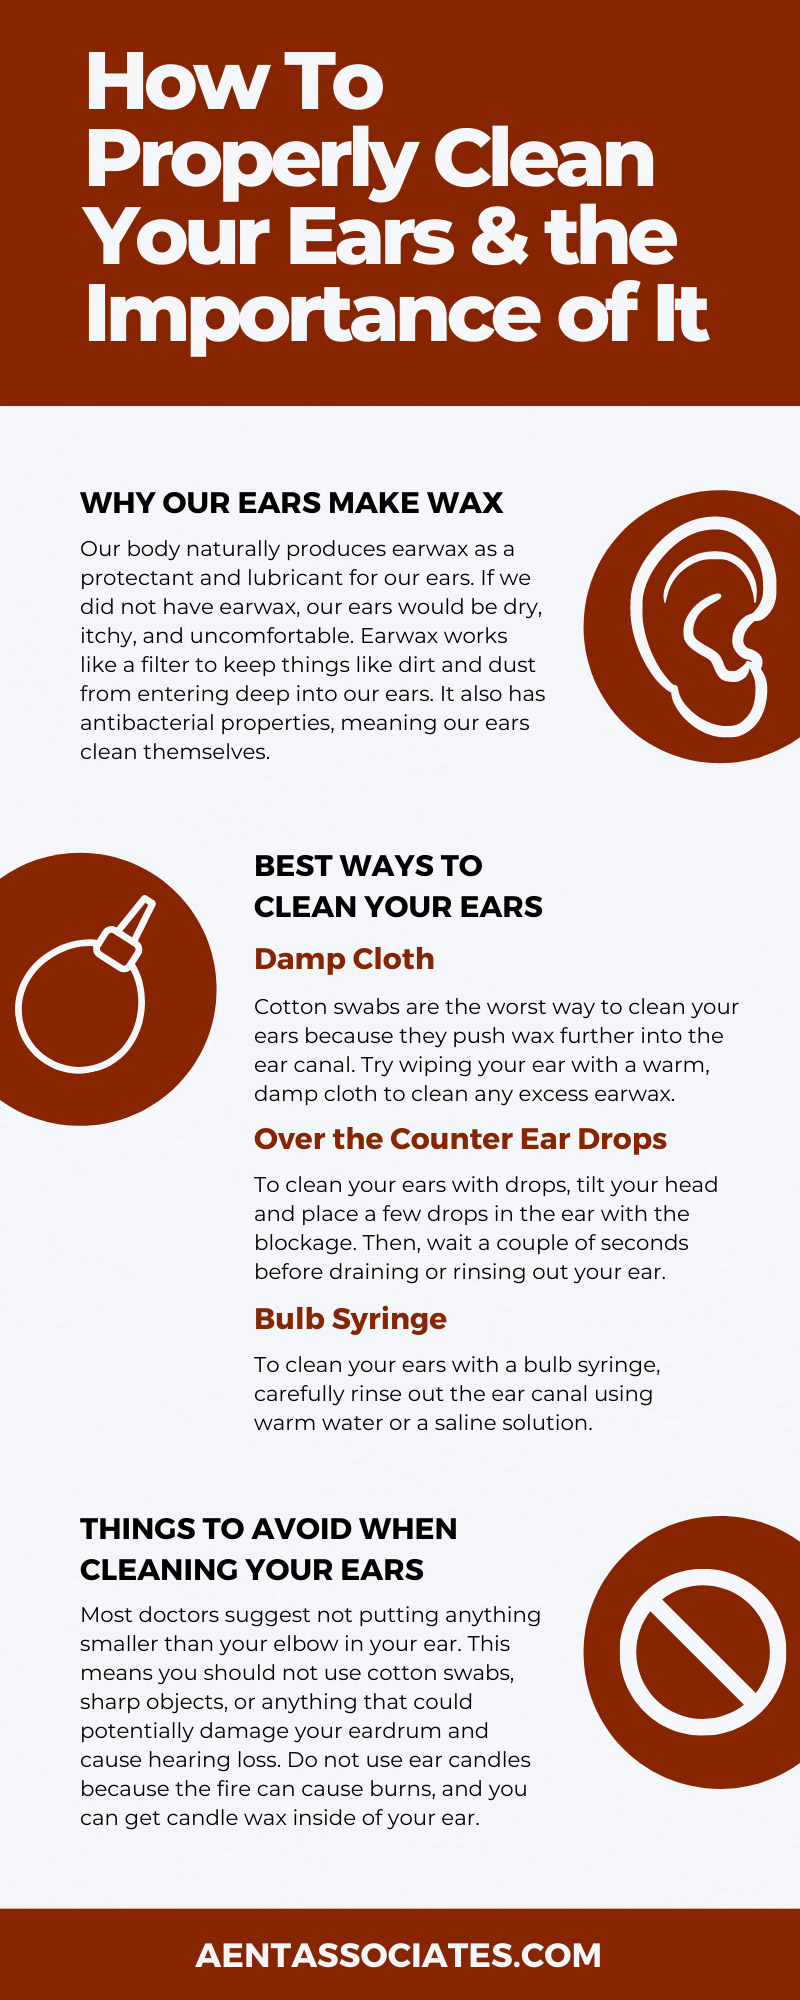 How To Properly Clean Your Ears & the Importance of It